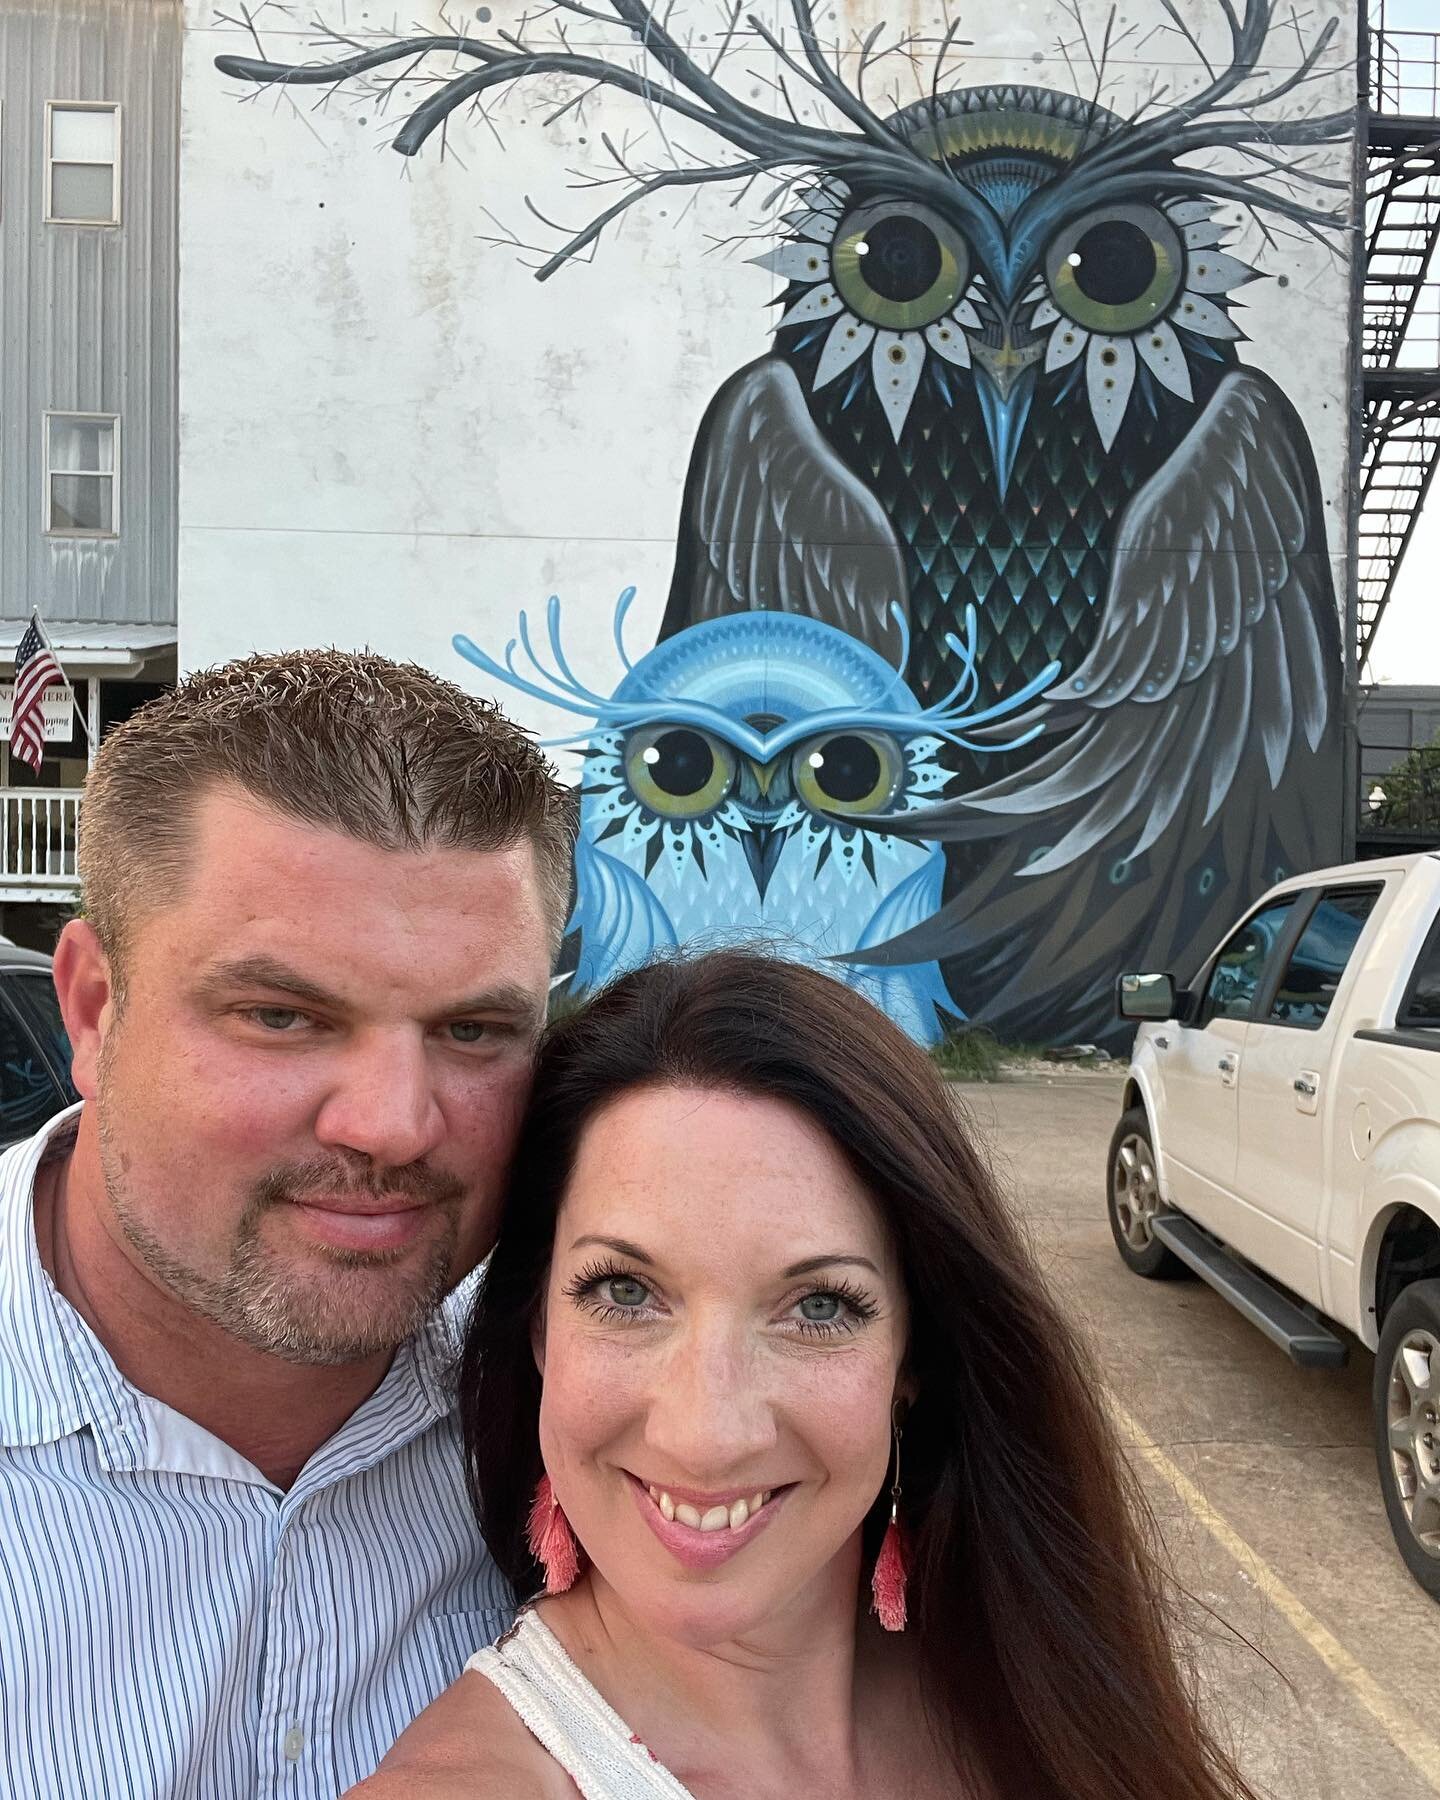 D A T E🦉N I G H T
.
.
Sometimes it&rsquo;s really nice to have a little time to ourselves. We had a great time walking around downtown Brenham last night. There are so many cool murals, little bars, and beautiful art galleries! I&rsquo;m thankful fo